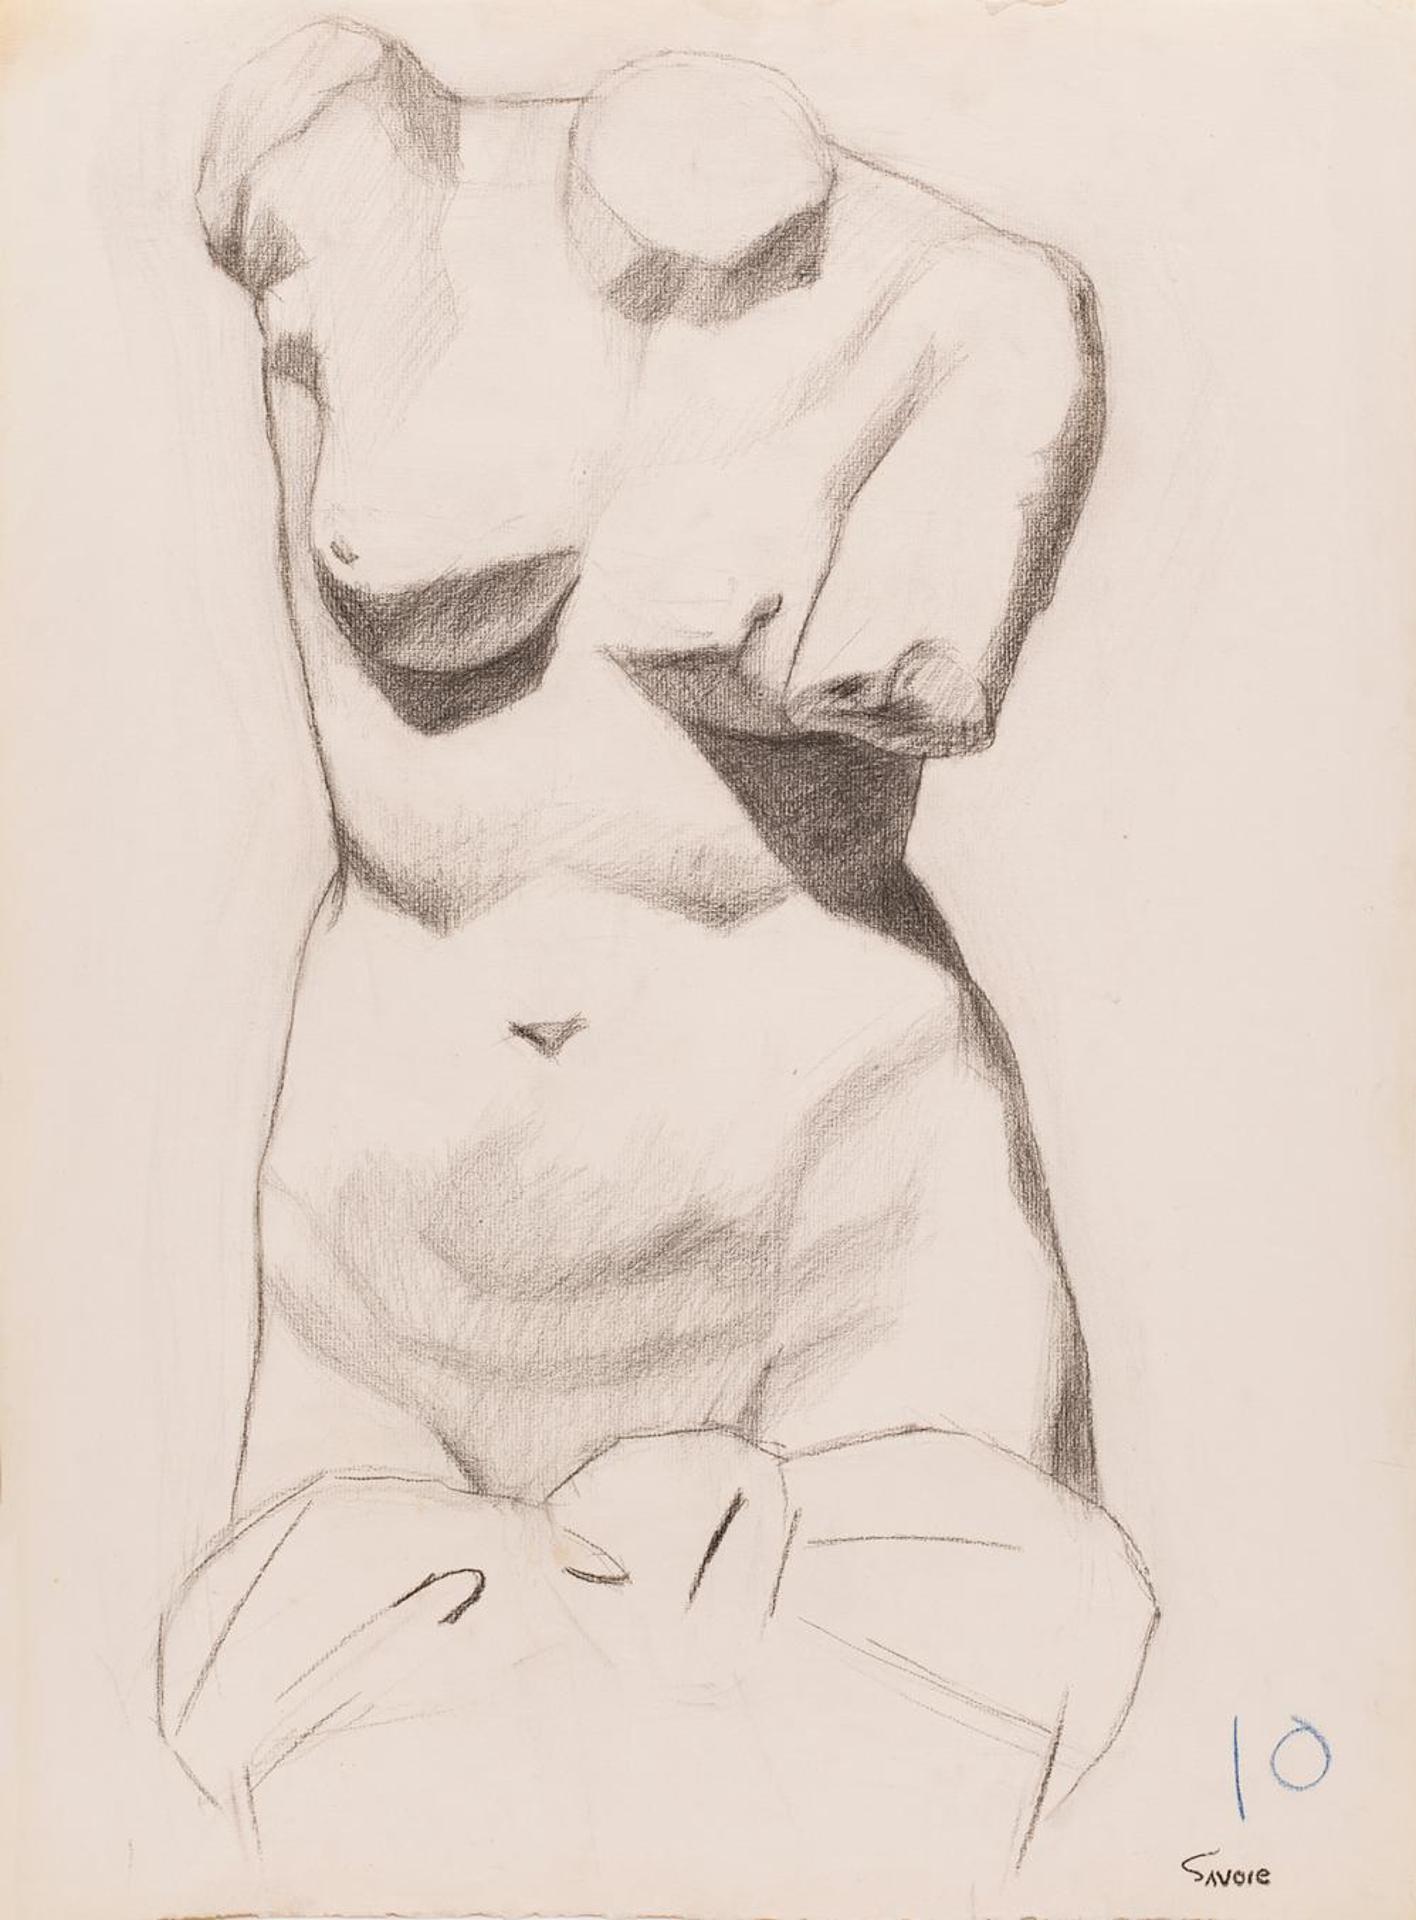 Gerald Savoie (1930) - Untitled - Study of a Female Statue